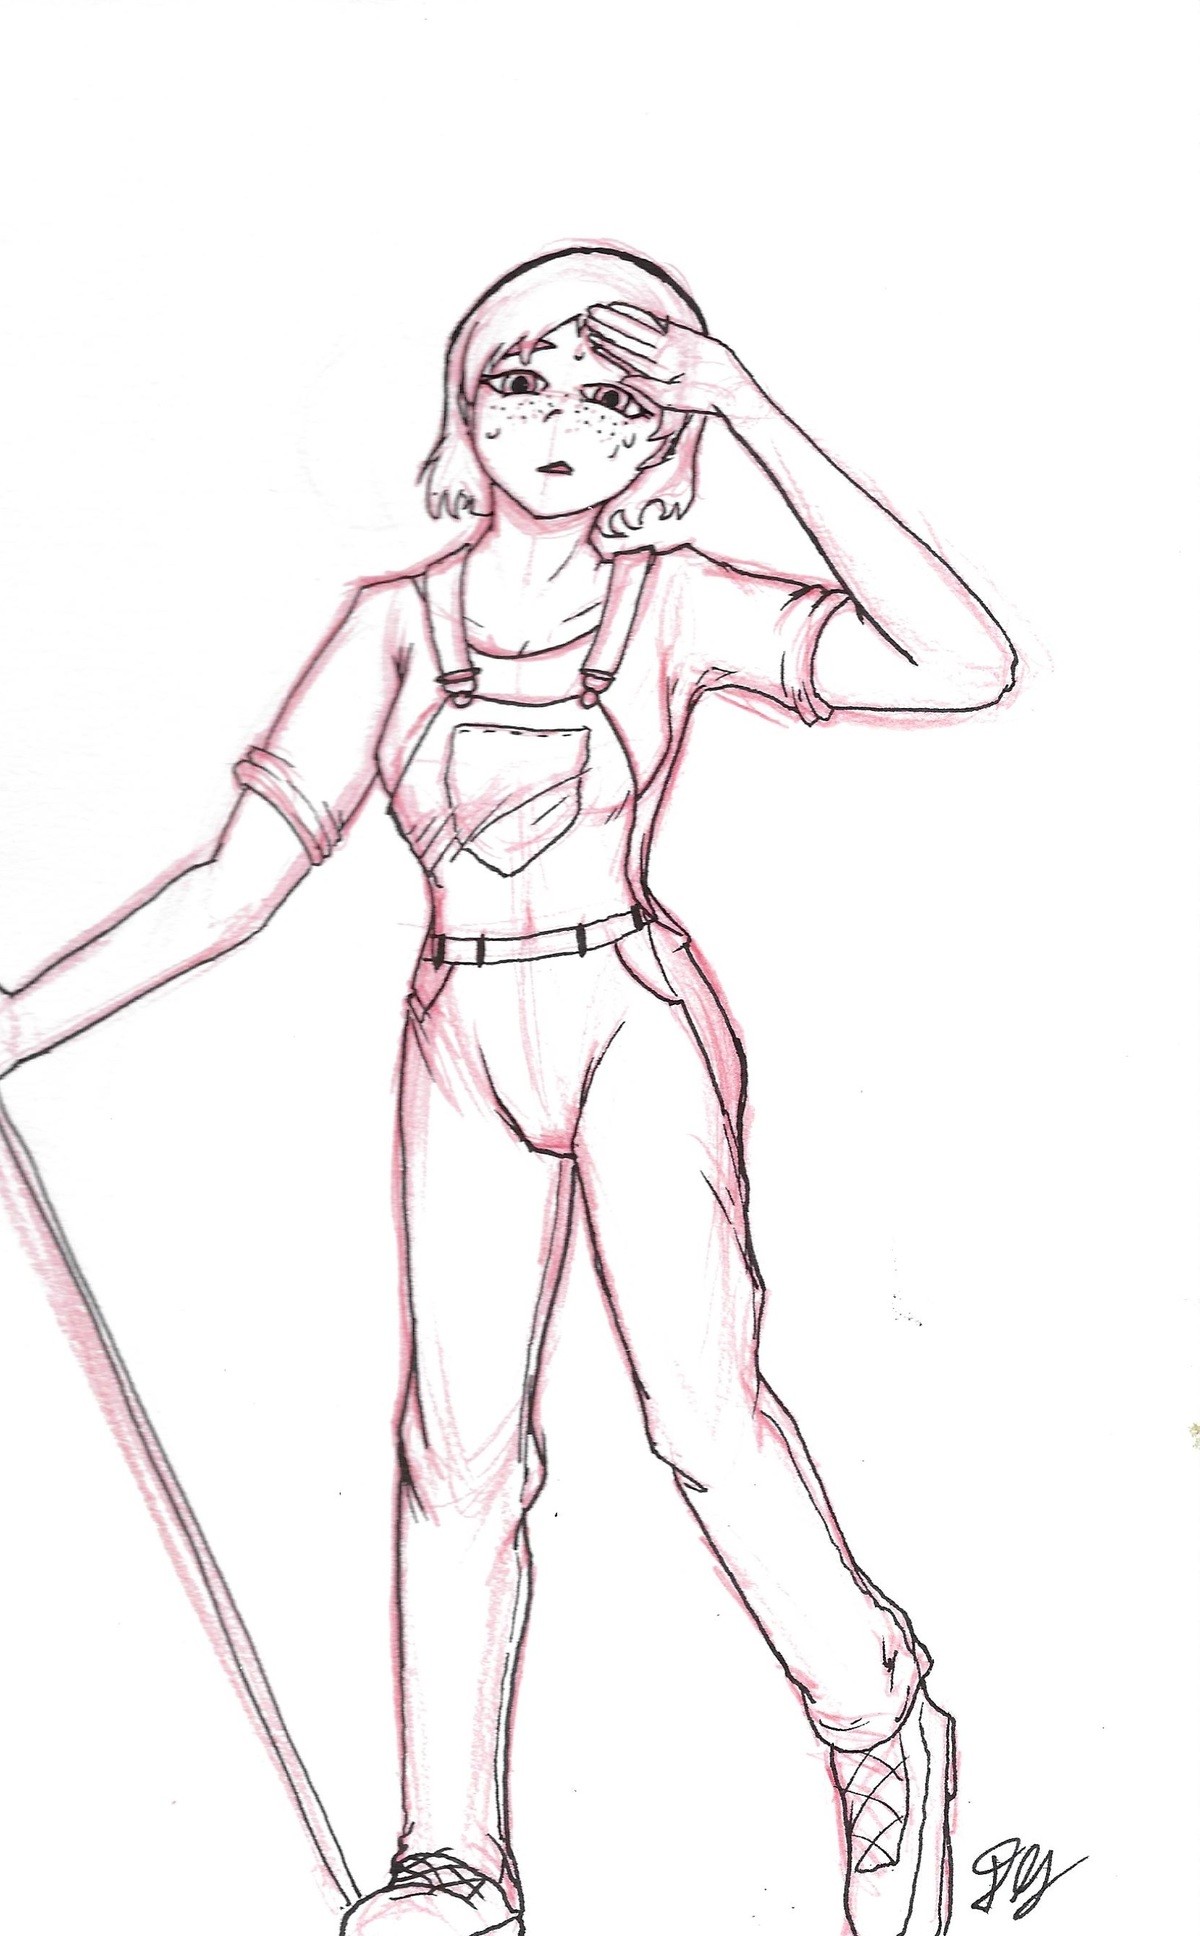 Jade in farmers clothes-wip. Friend gave me a quick drawing challenge of drawing an OC in a different outfit, rolled up farmers clothes. Havent done much tradit